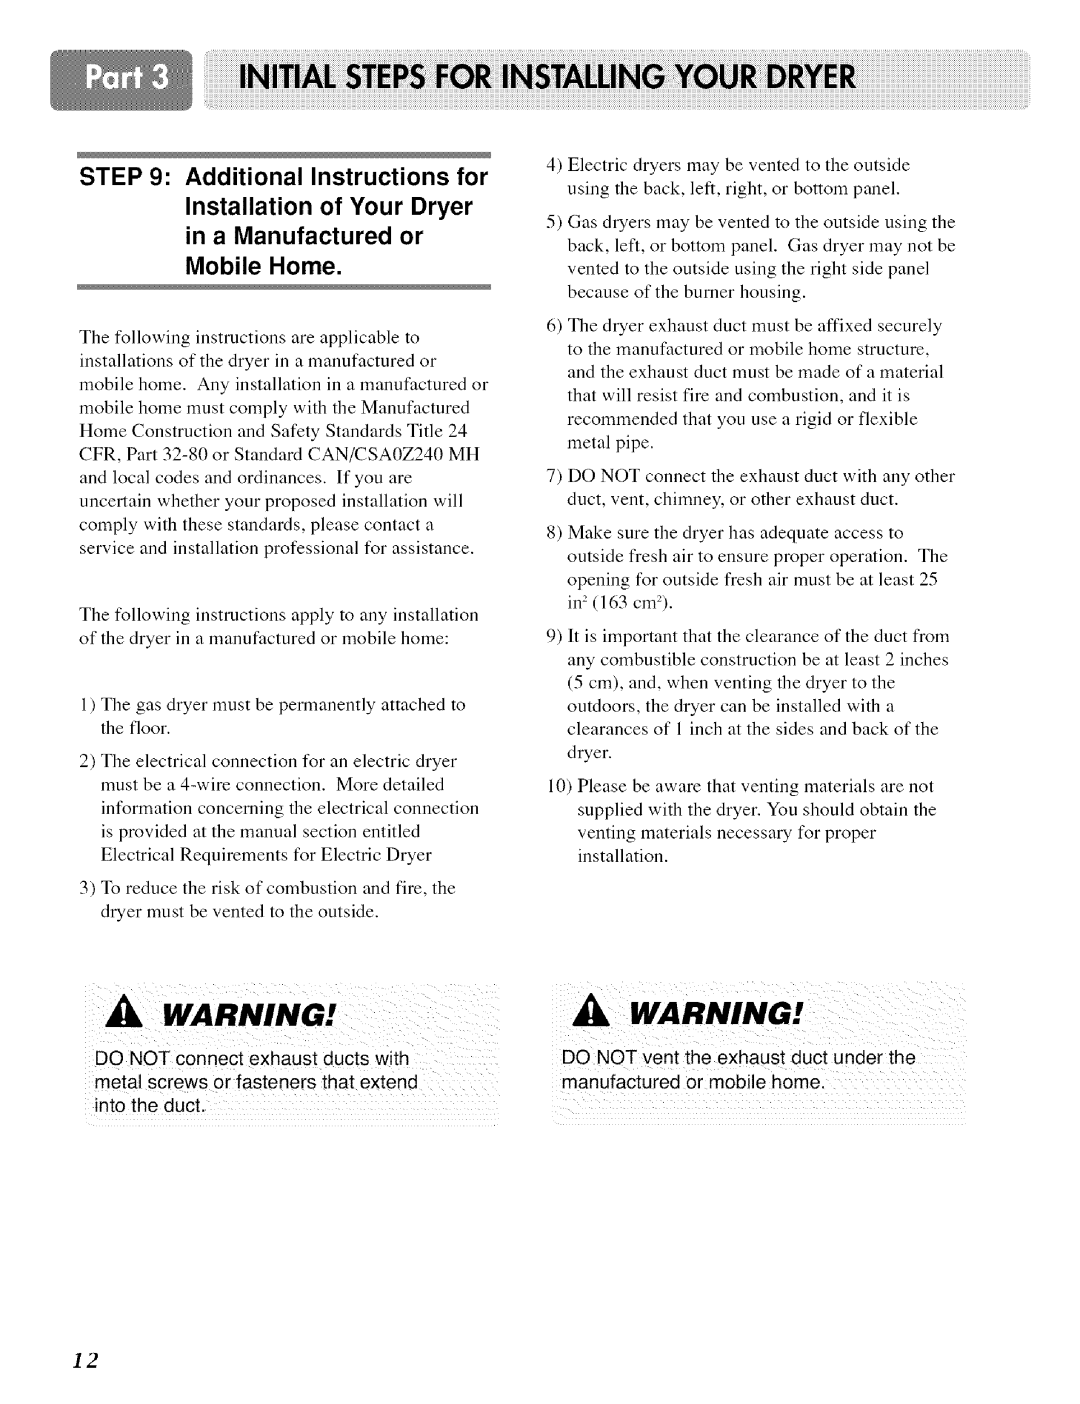 LG Electronics DLE 5977W Additional Instructions for, Installation of Your Dryer in a Manufactured or Mobile Home, exhaust 